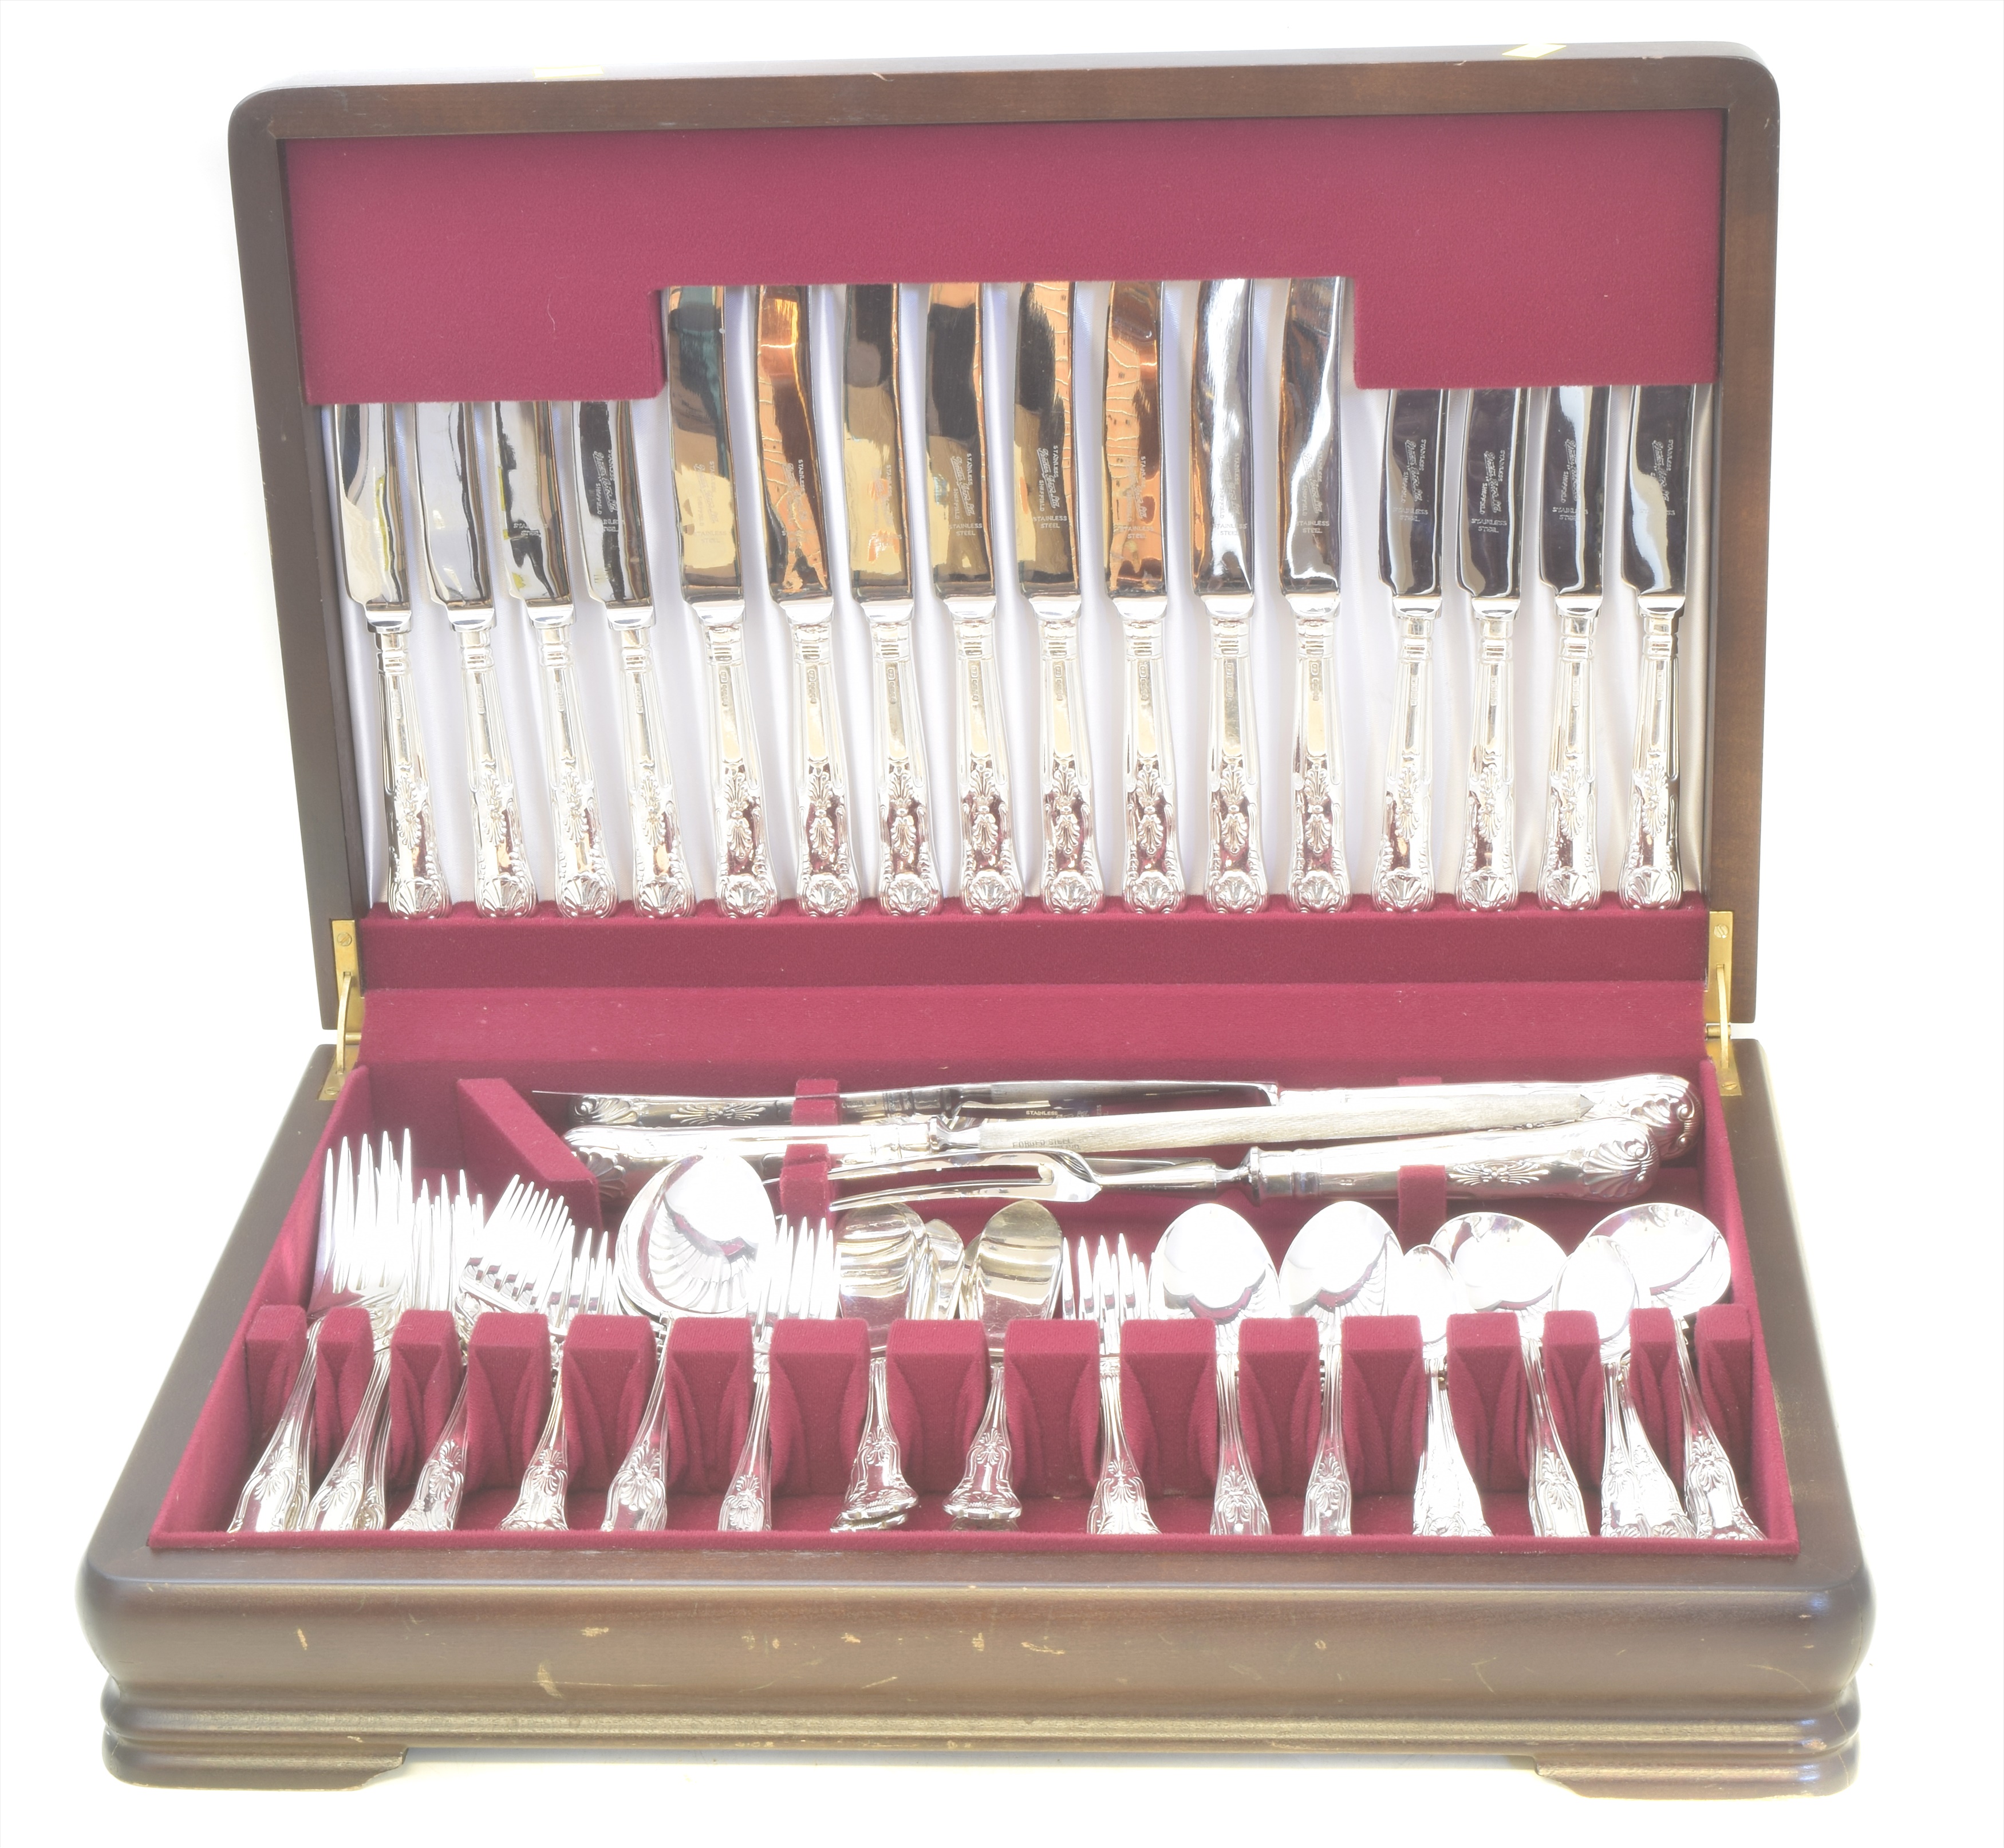 An Elizabeth II 97 piece canteen of silver and silver handled 'King's pattern' cutlery, comprising eight silver dinner forks, eight silver fish forks, four silver table spoons, eight silver dessert forks, eight silver fish knives, eight silver dessert spoons, eight silver boiled egg spoons, eight silver soup spoons, eight silver teaspoons, eight silver handled table knives, eight silver handled dessert knives, two silver handled meat skewers and one silver handled carving knife, together with two additional silver handled dessert knives and eight silver handled butter knives in a mahogany veneered canteen, hallmarks for Pinder Brothers, Sheffield, 1977, gross weight of solid silver items 126.13ozt.